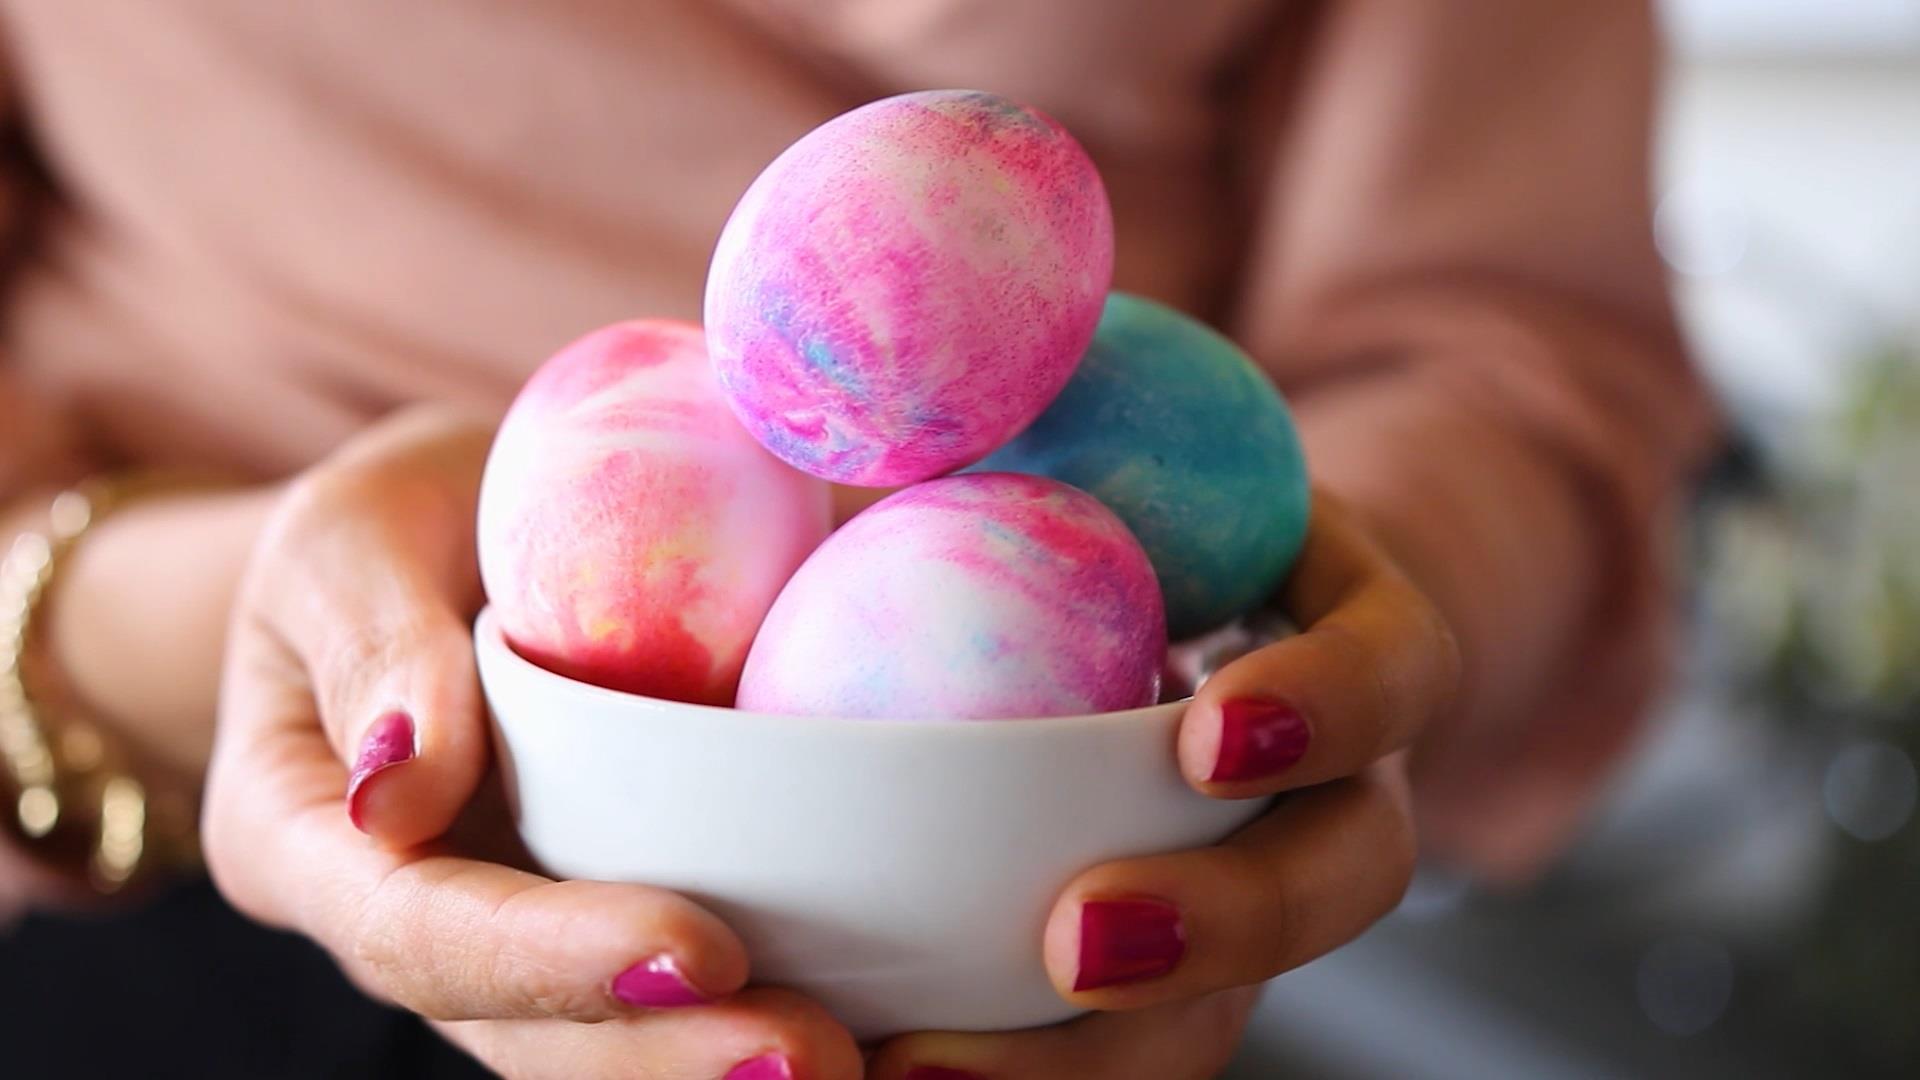 How to decorate Easter eggs using shaving cream